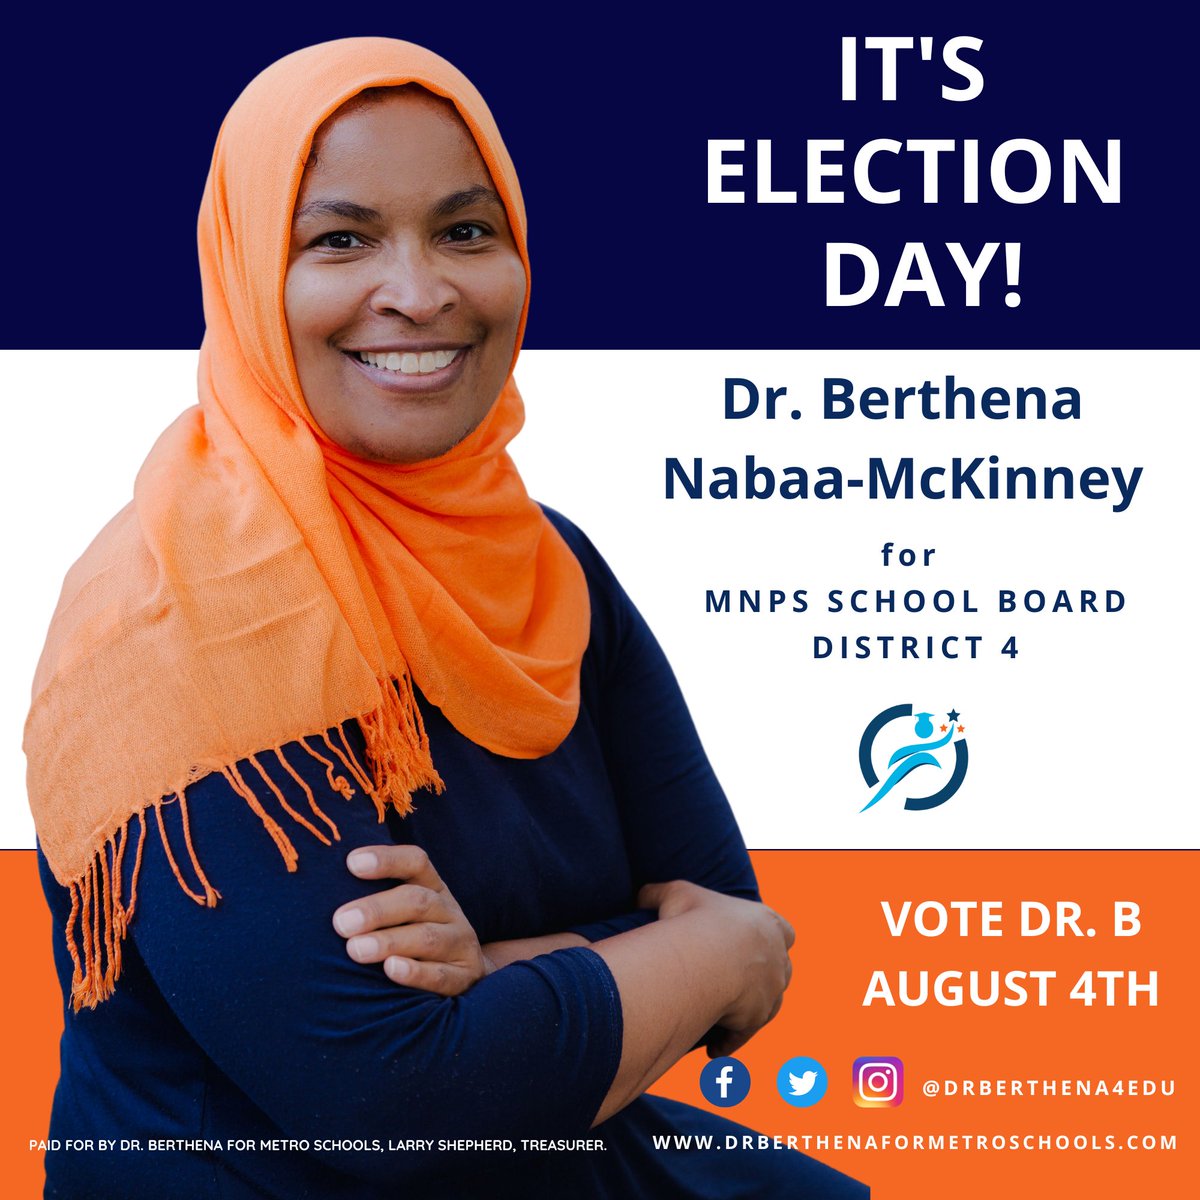 It's Election Day Nashville! We sure hope we can count on you to show up and vote for Dr. B for School Board in District 4!

Find your polling location here: maps.nashville.gov/pollingplacefi…

#imwithdrb #drb4schoolboard #votefordrb #drbforsbd4